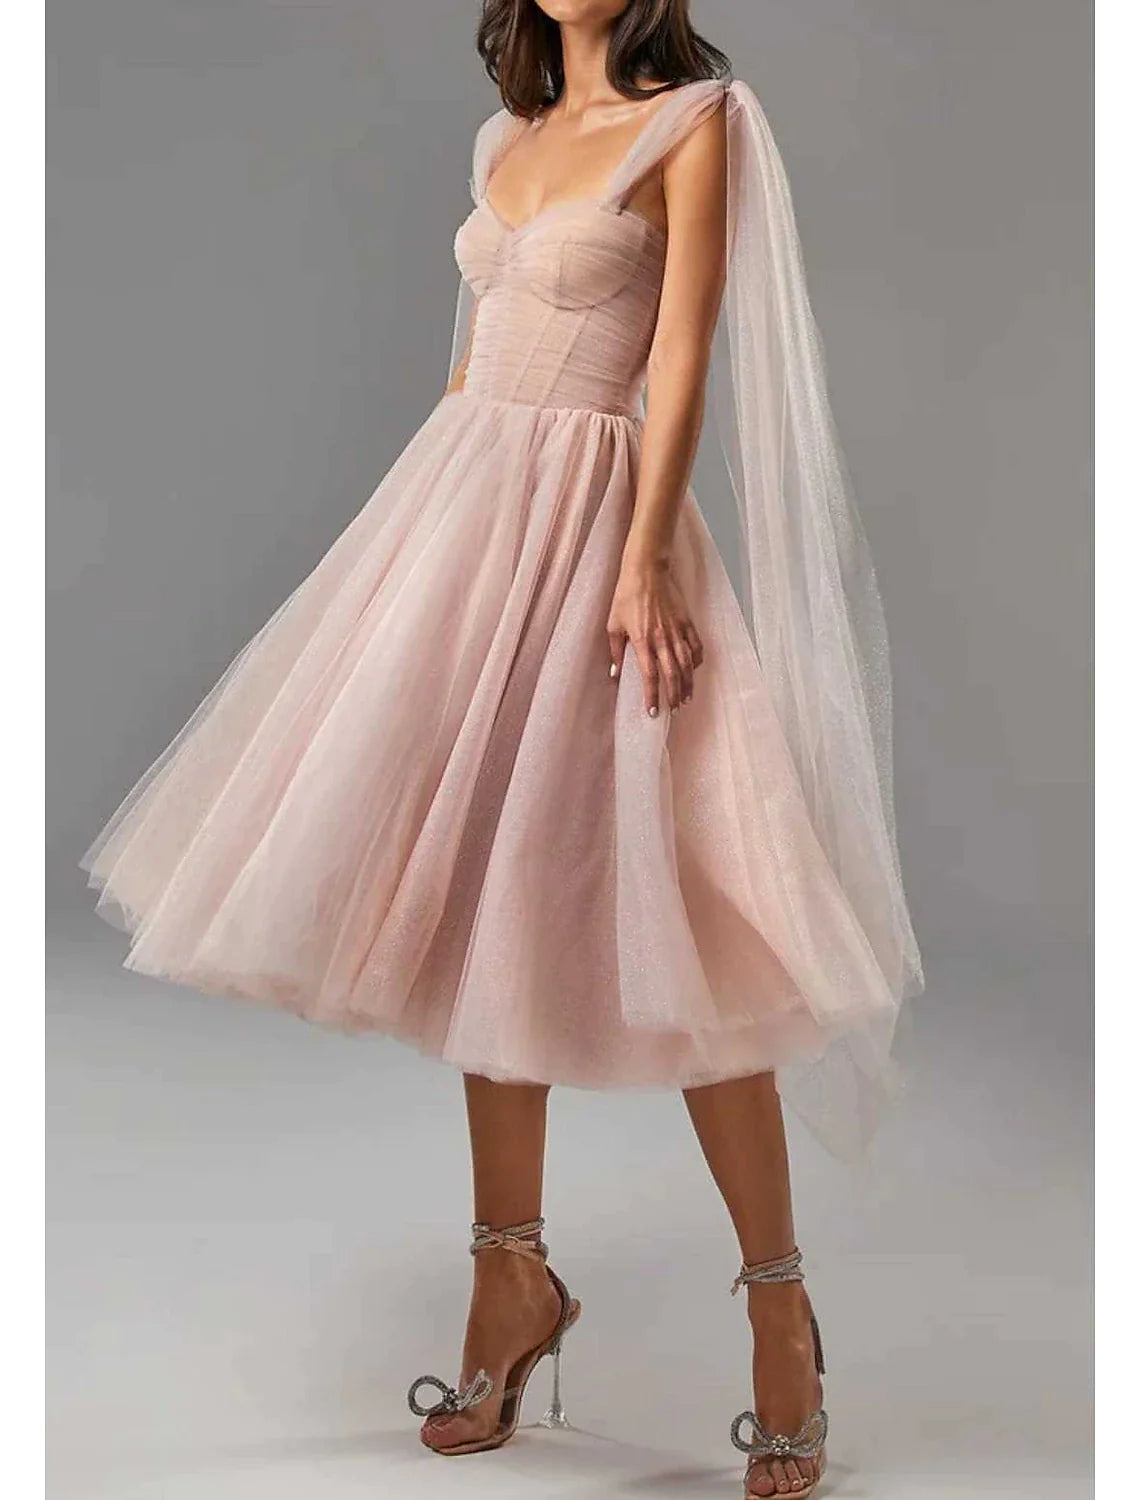 Ball Gown Cocktail Dresses Corsets Dress Graduation Birthday Tea Length Sleeveless Square Neck Tulle with Glitter